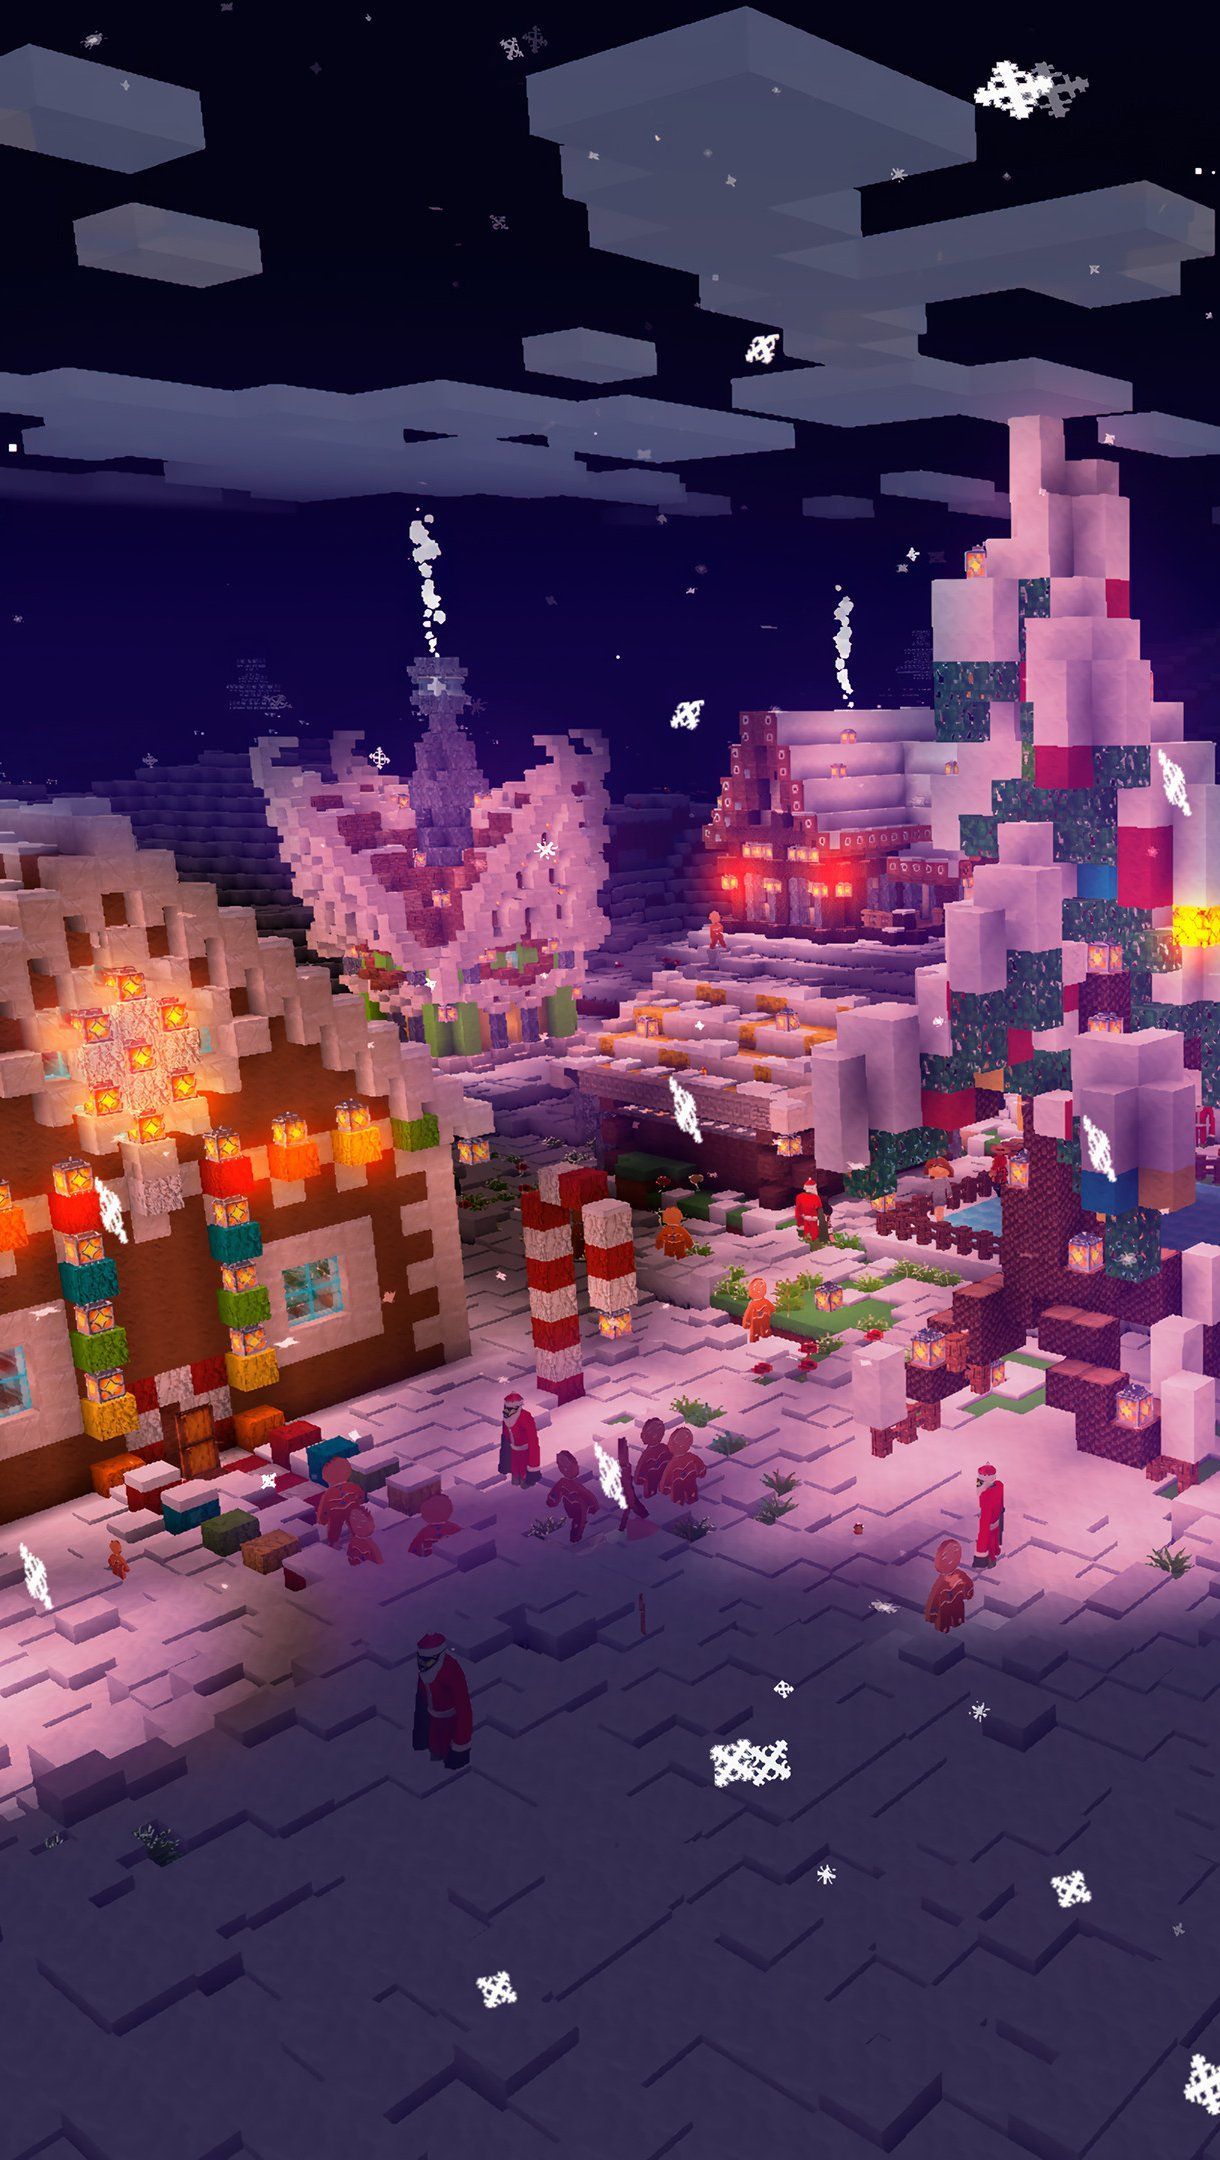 A screenshot of a Minecraft village decorated for Christmas. - Minecraft